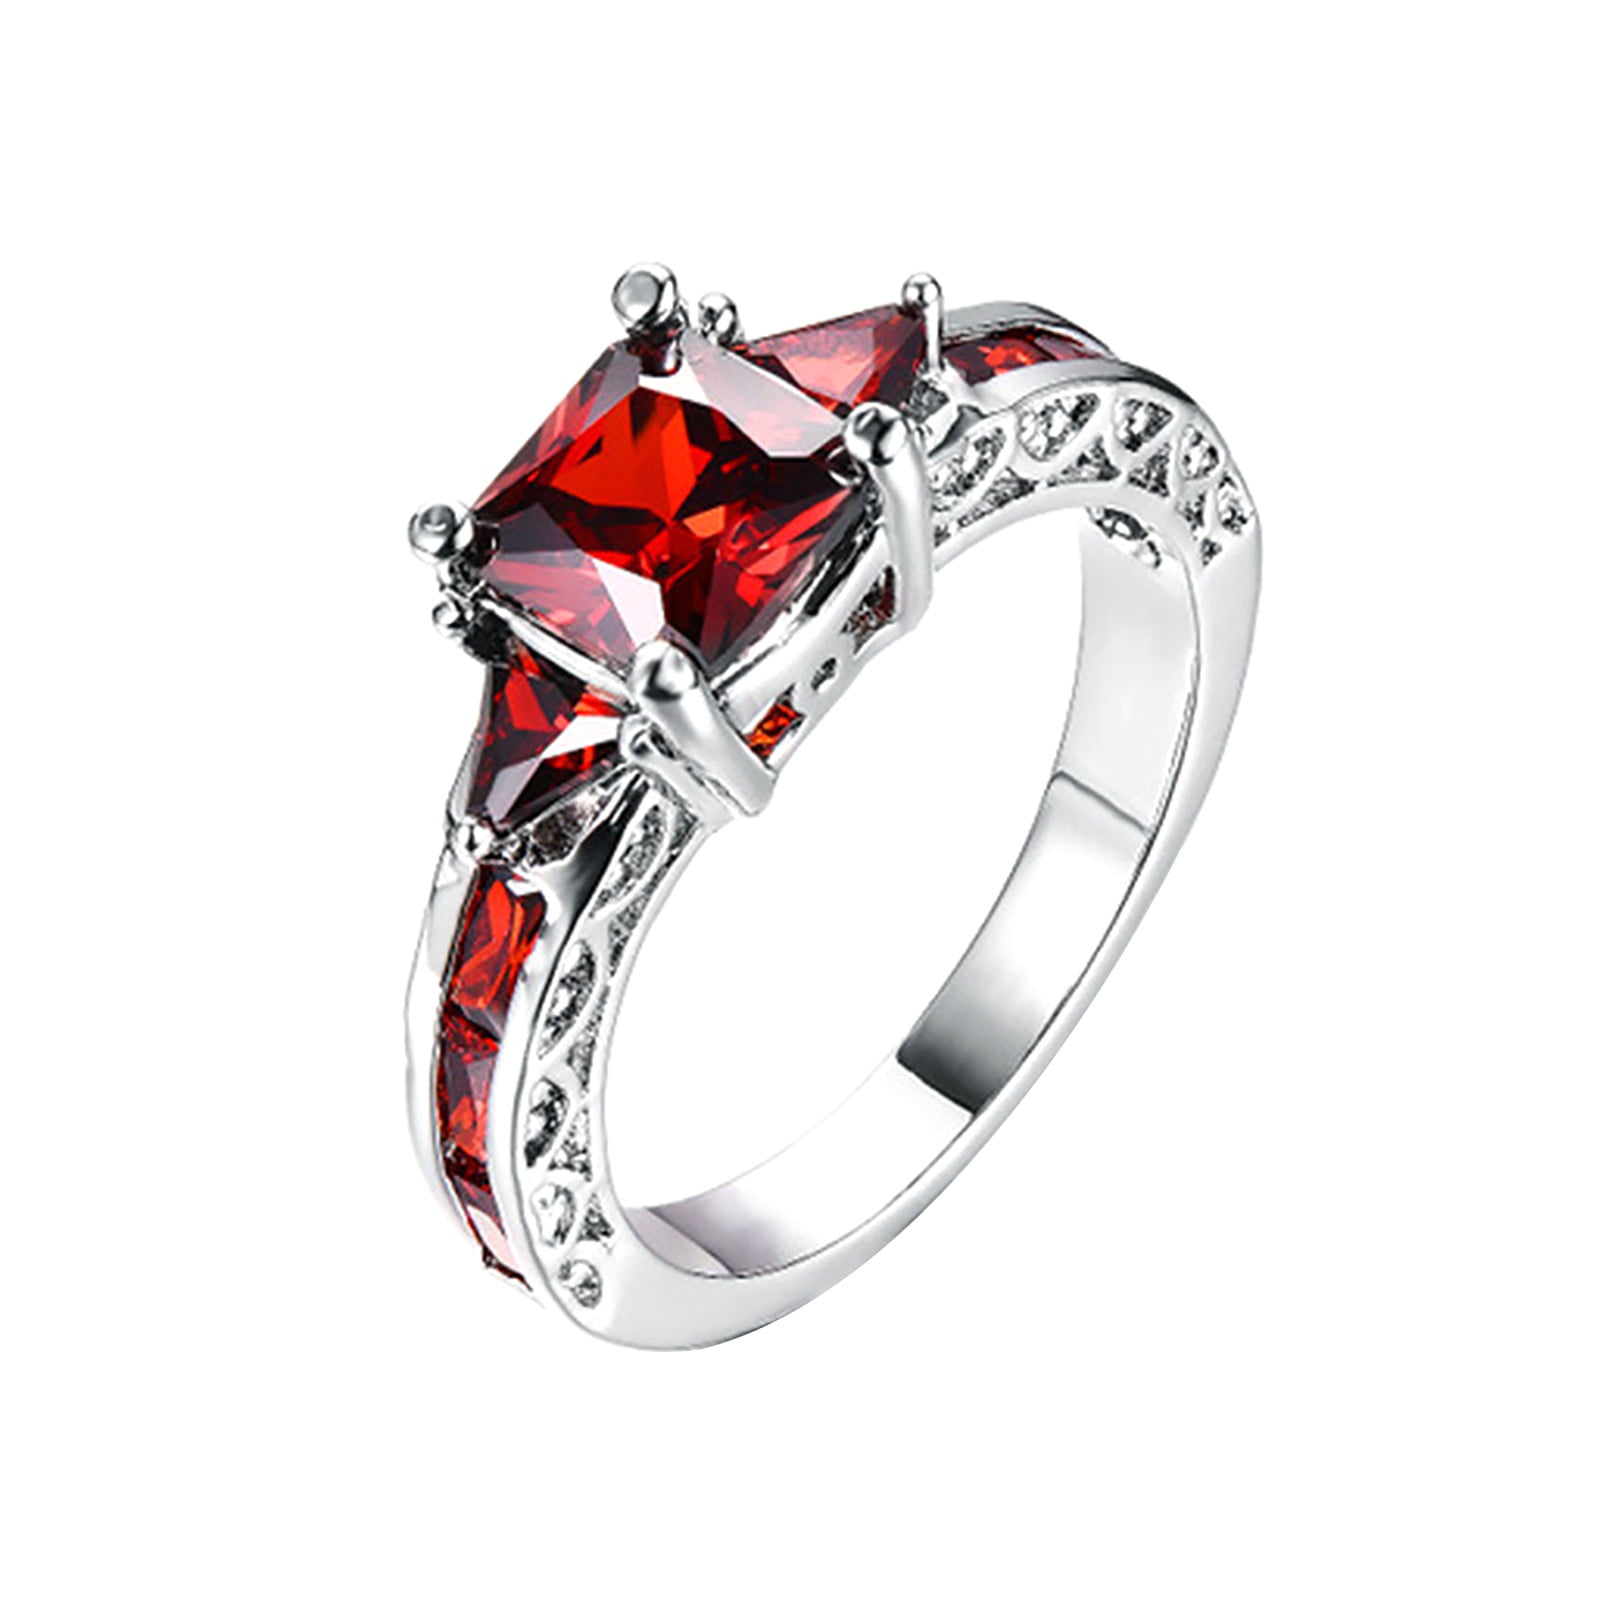 Details about   925 Sterling Silver Certified Handmade 7 Carart Ruby Gemstone Engagment Ring 